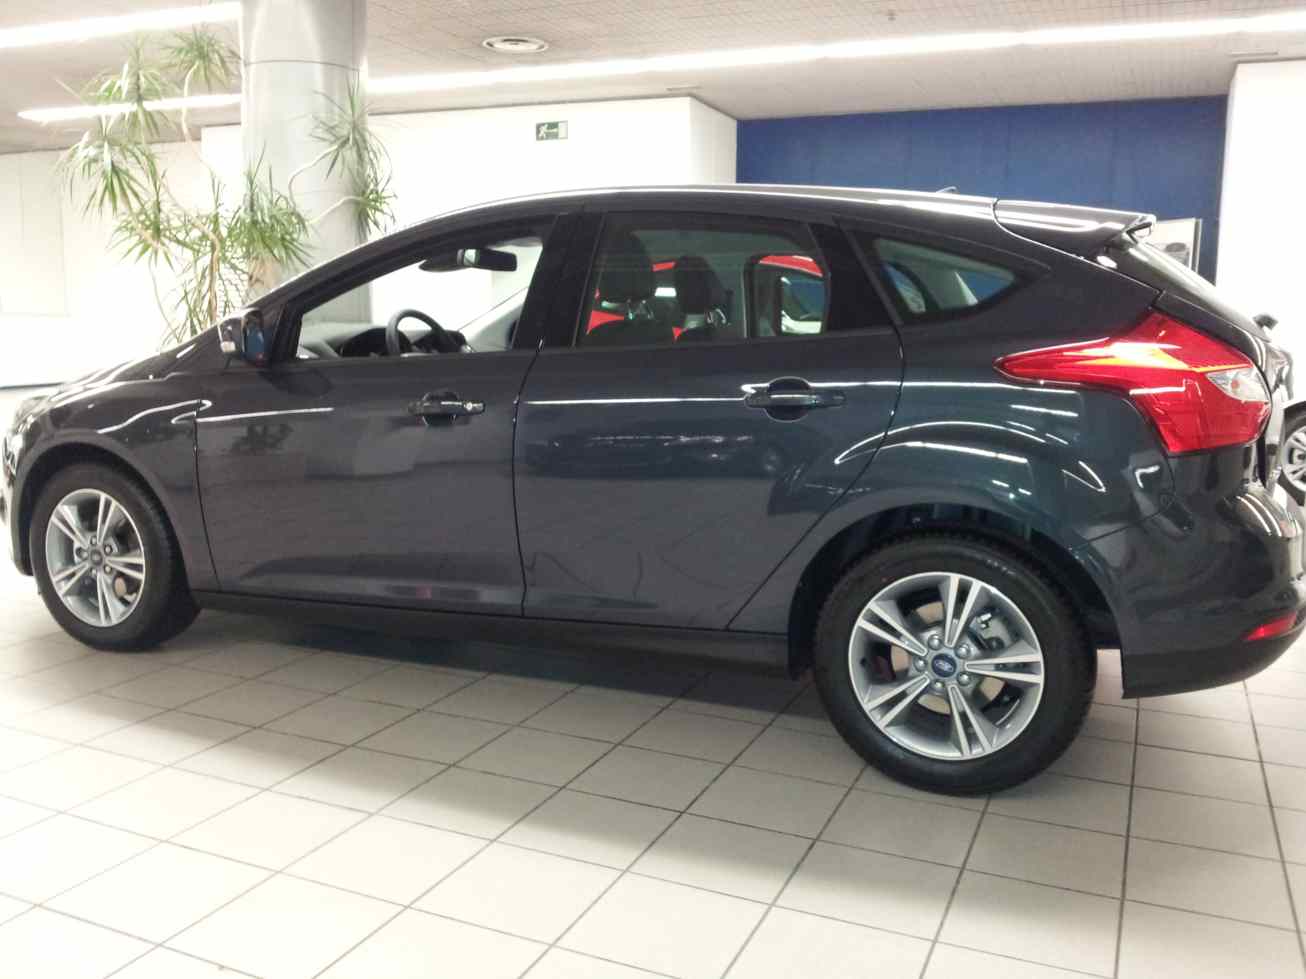 Ford northland edition focus